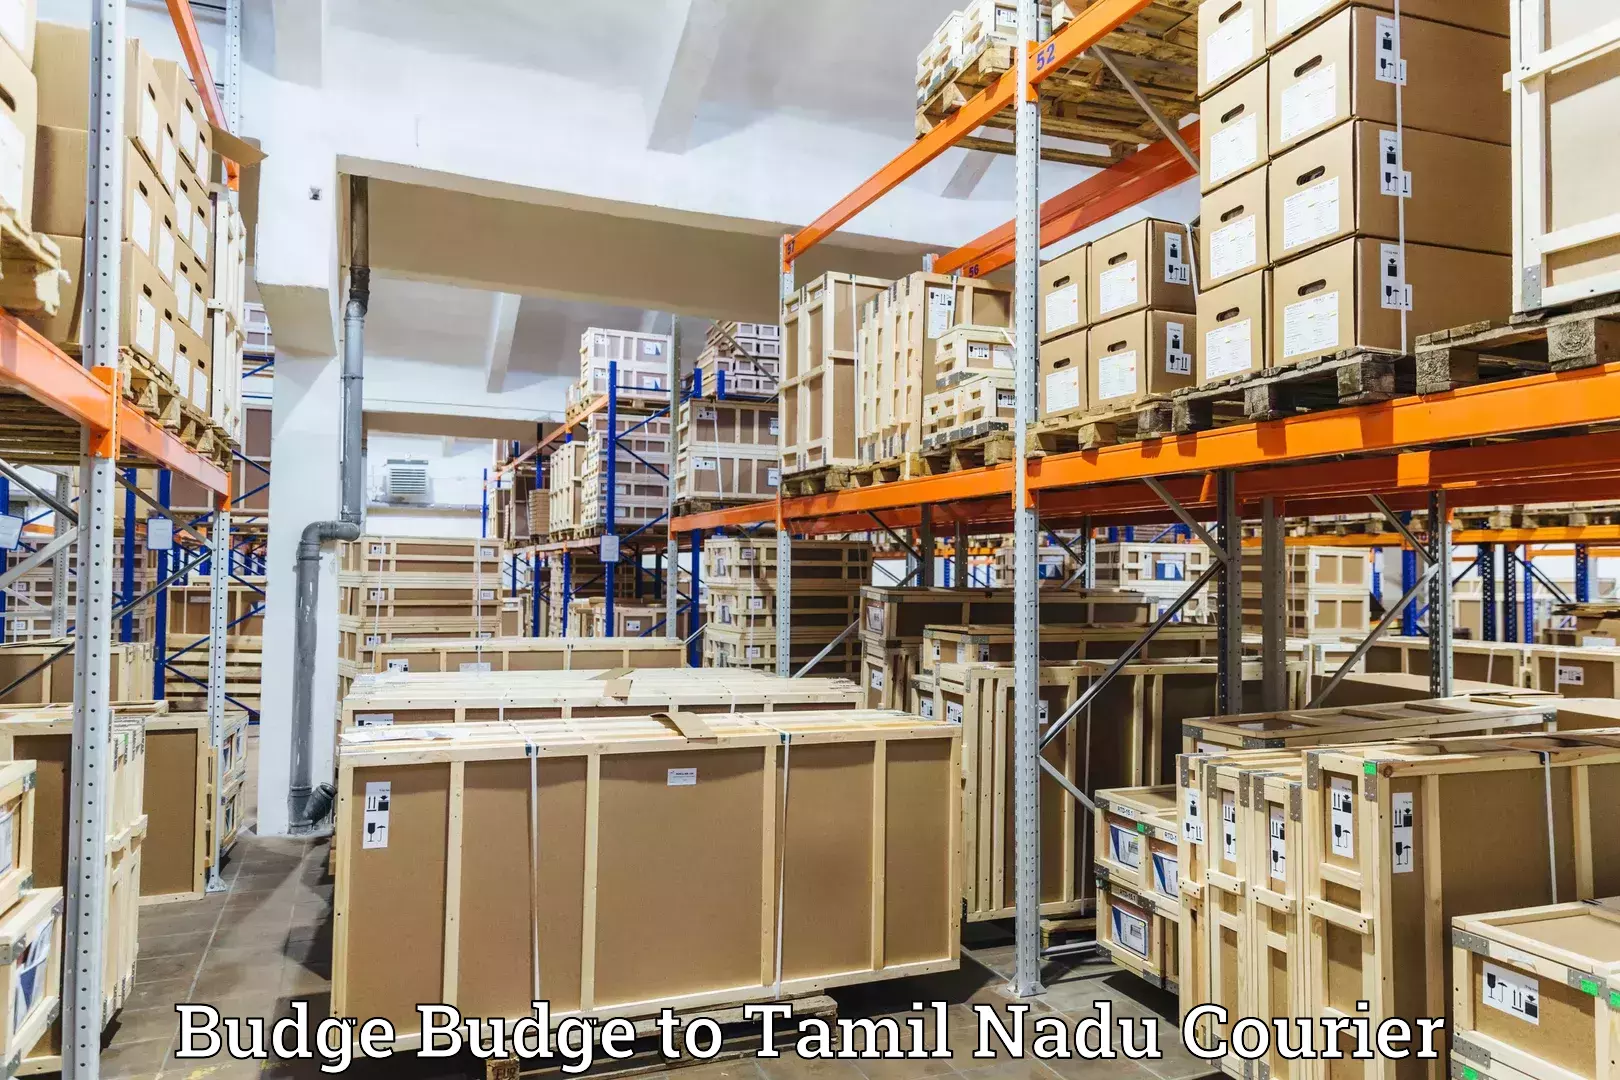 Express delivery capabilities Budge Budge to Ranipet